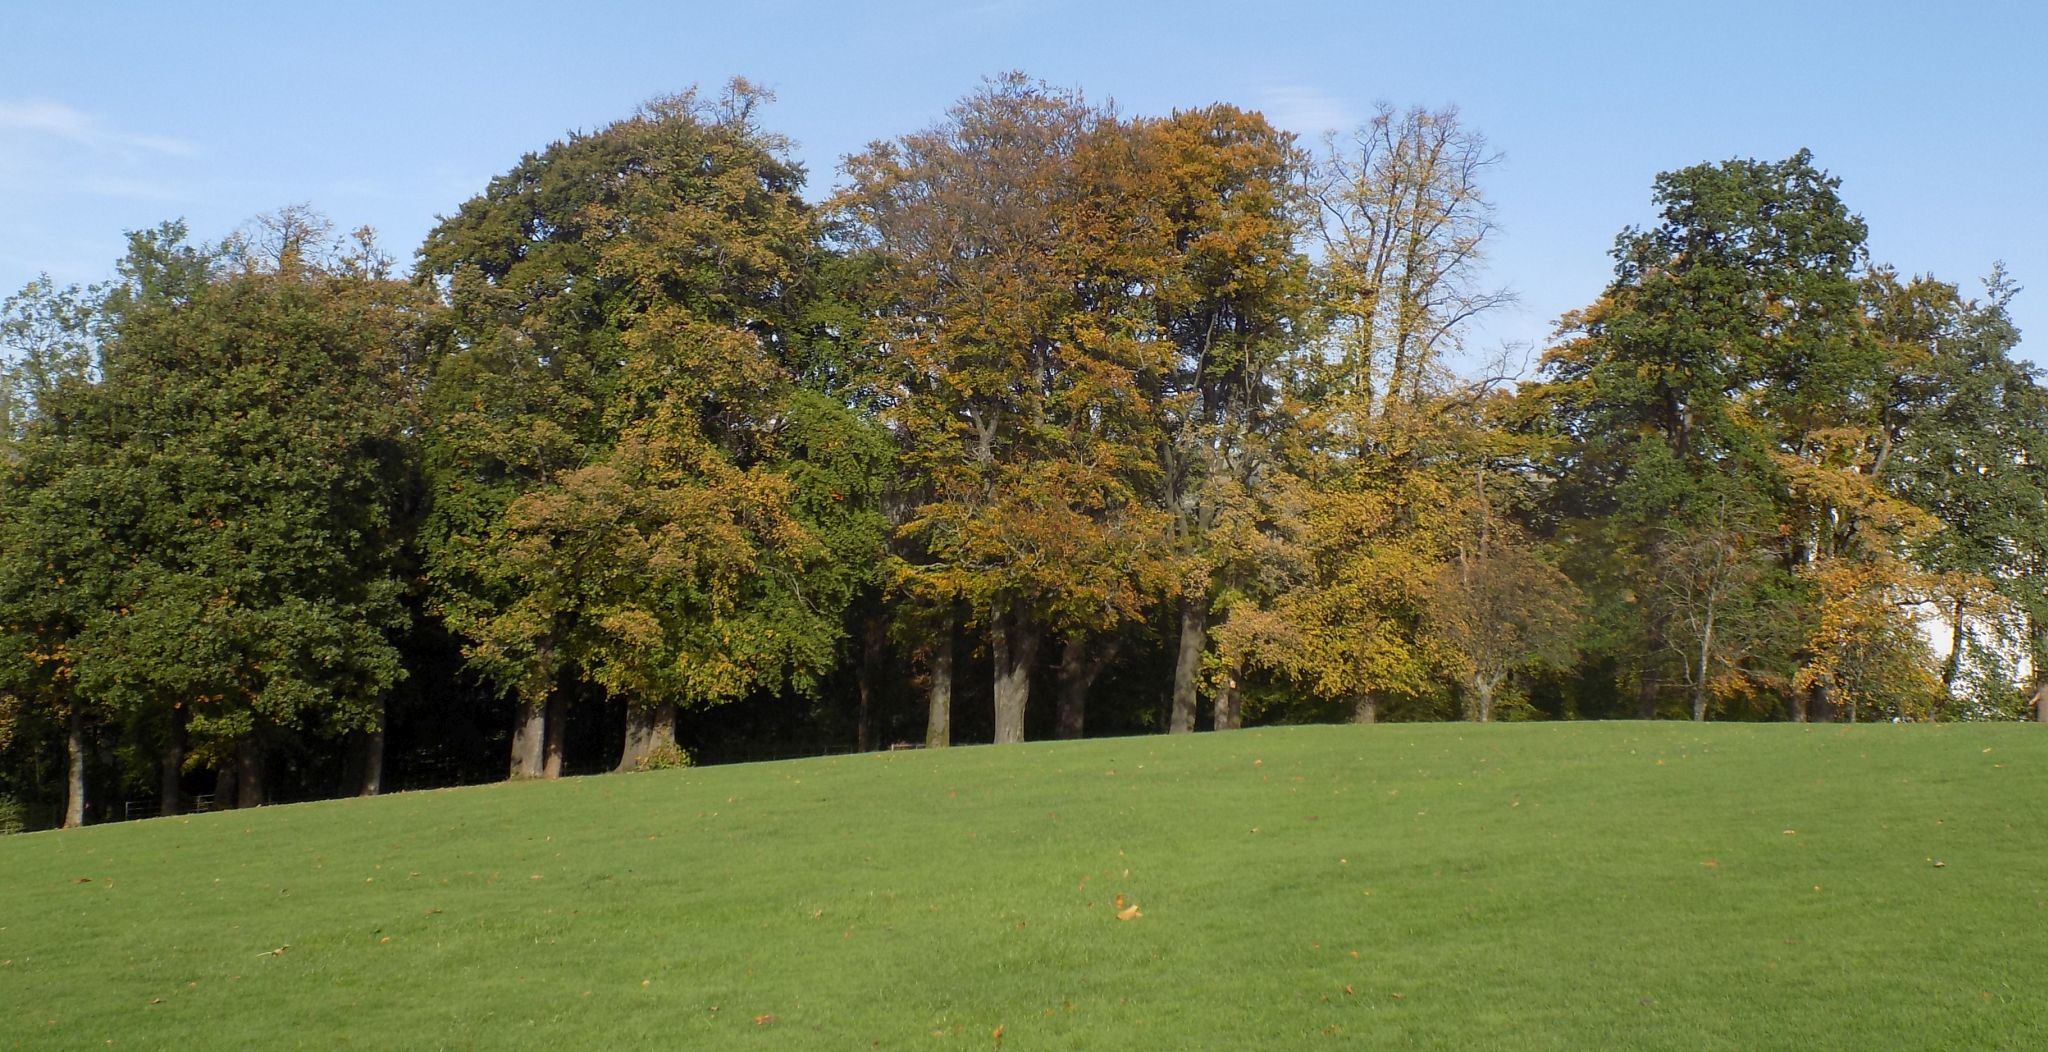 Trees in Dalmuir Park